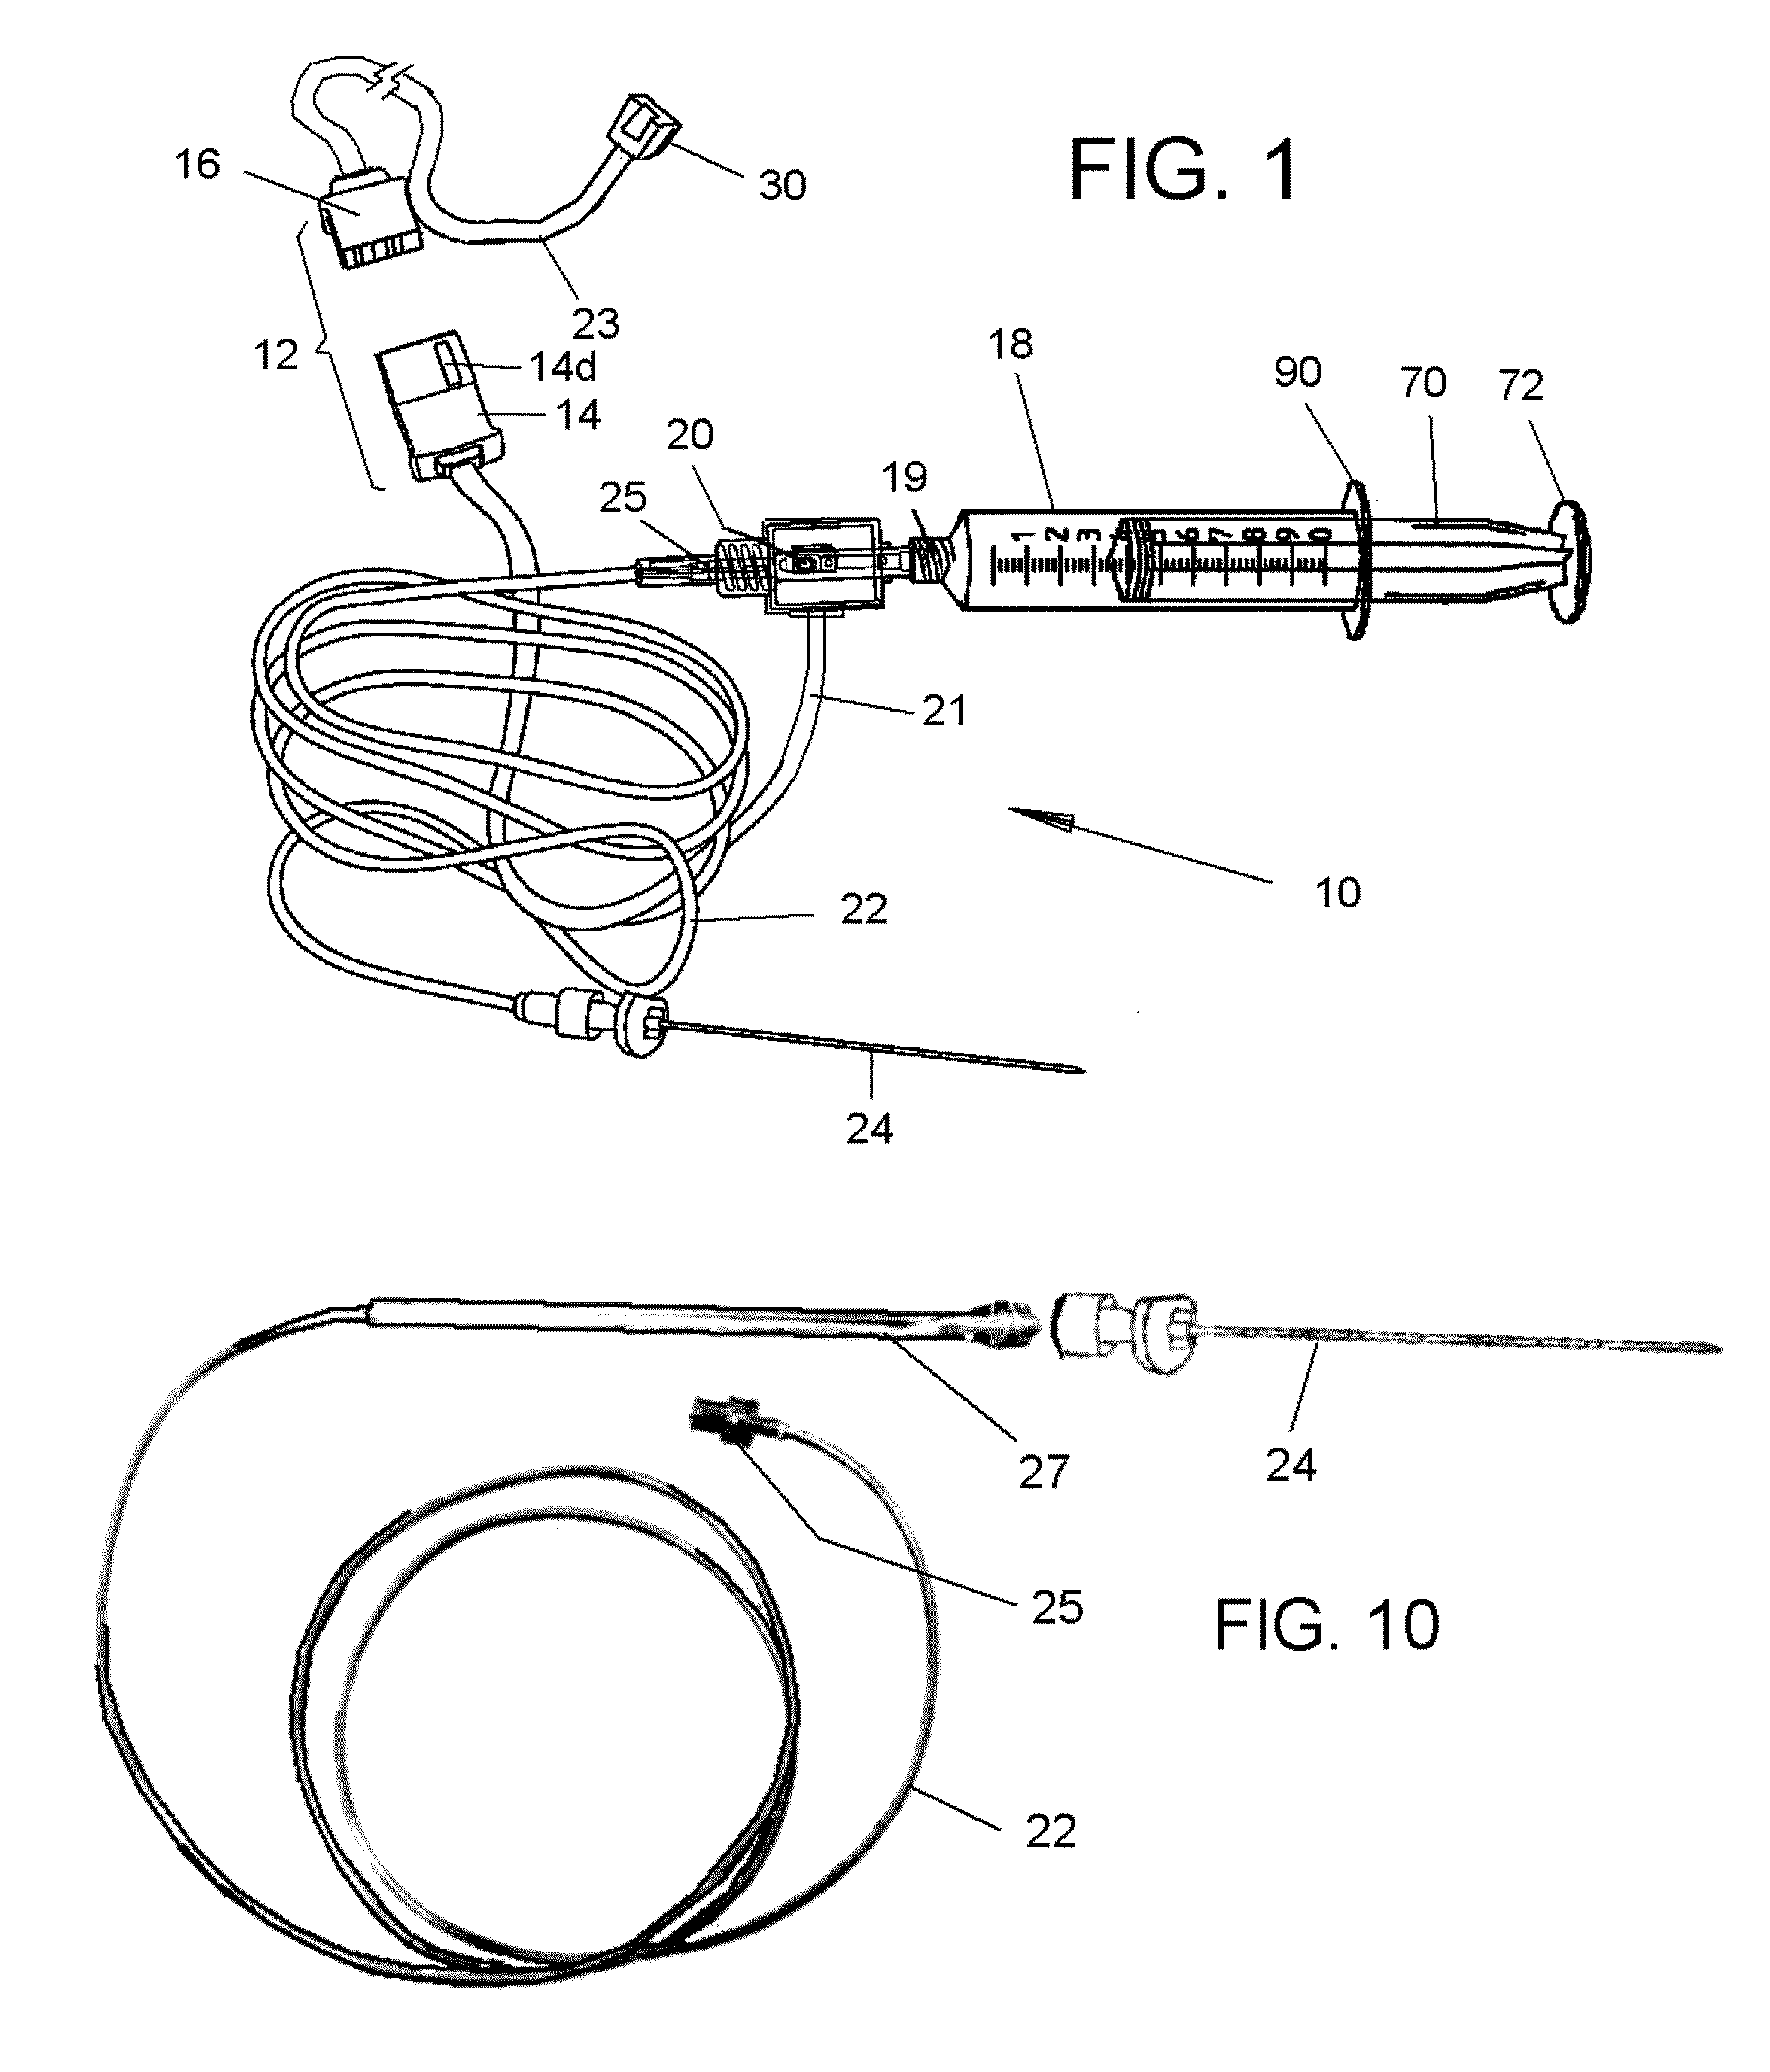 Drug infusion with pressure sensing and non-continuous flow for identification of and injection into fluid-filled anatomic spaces